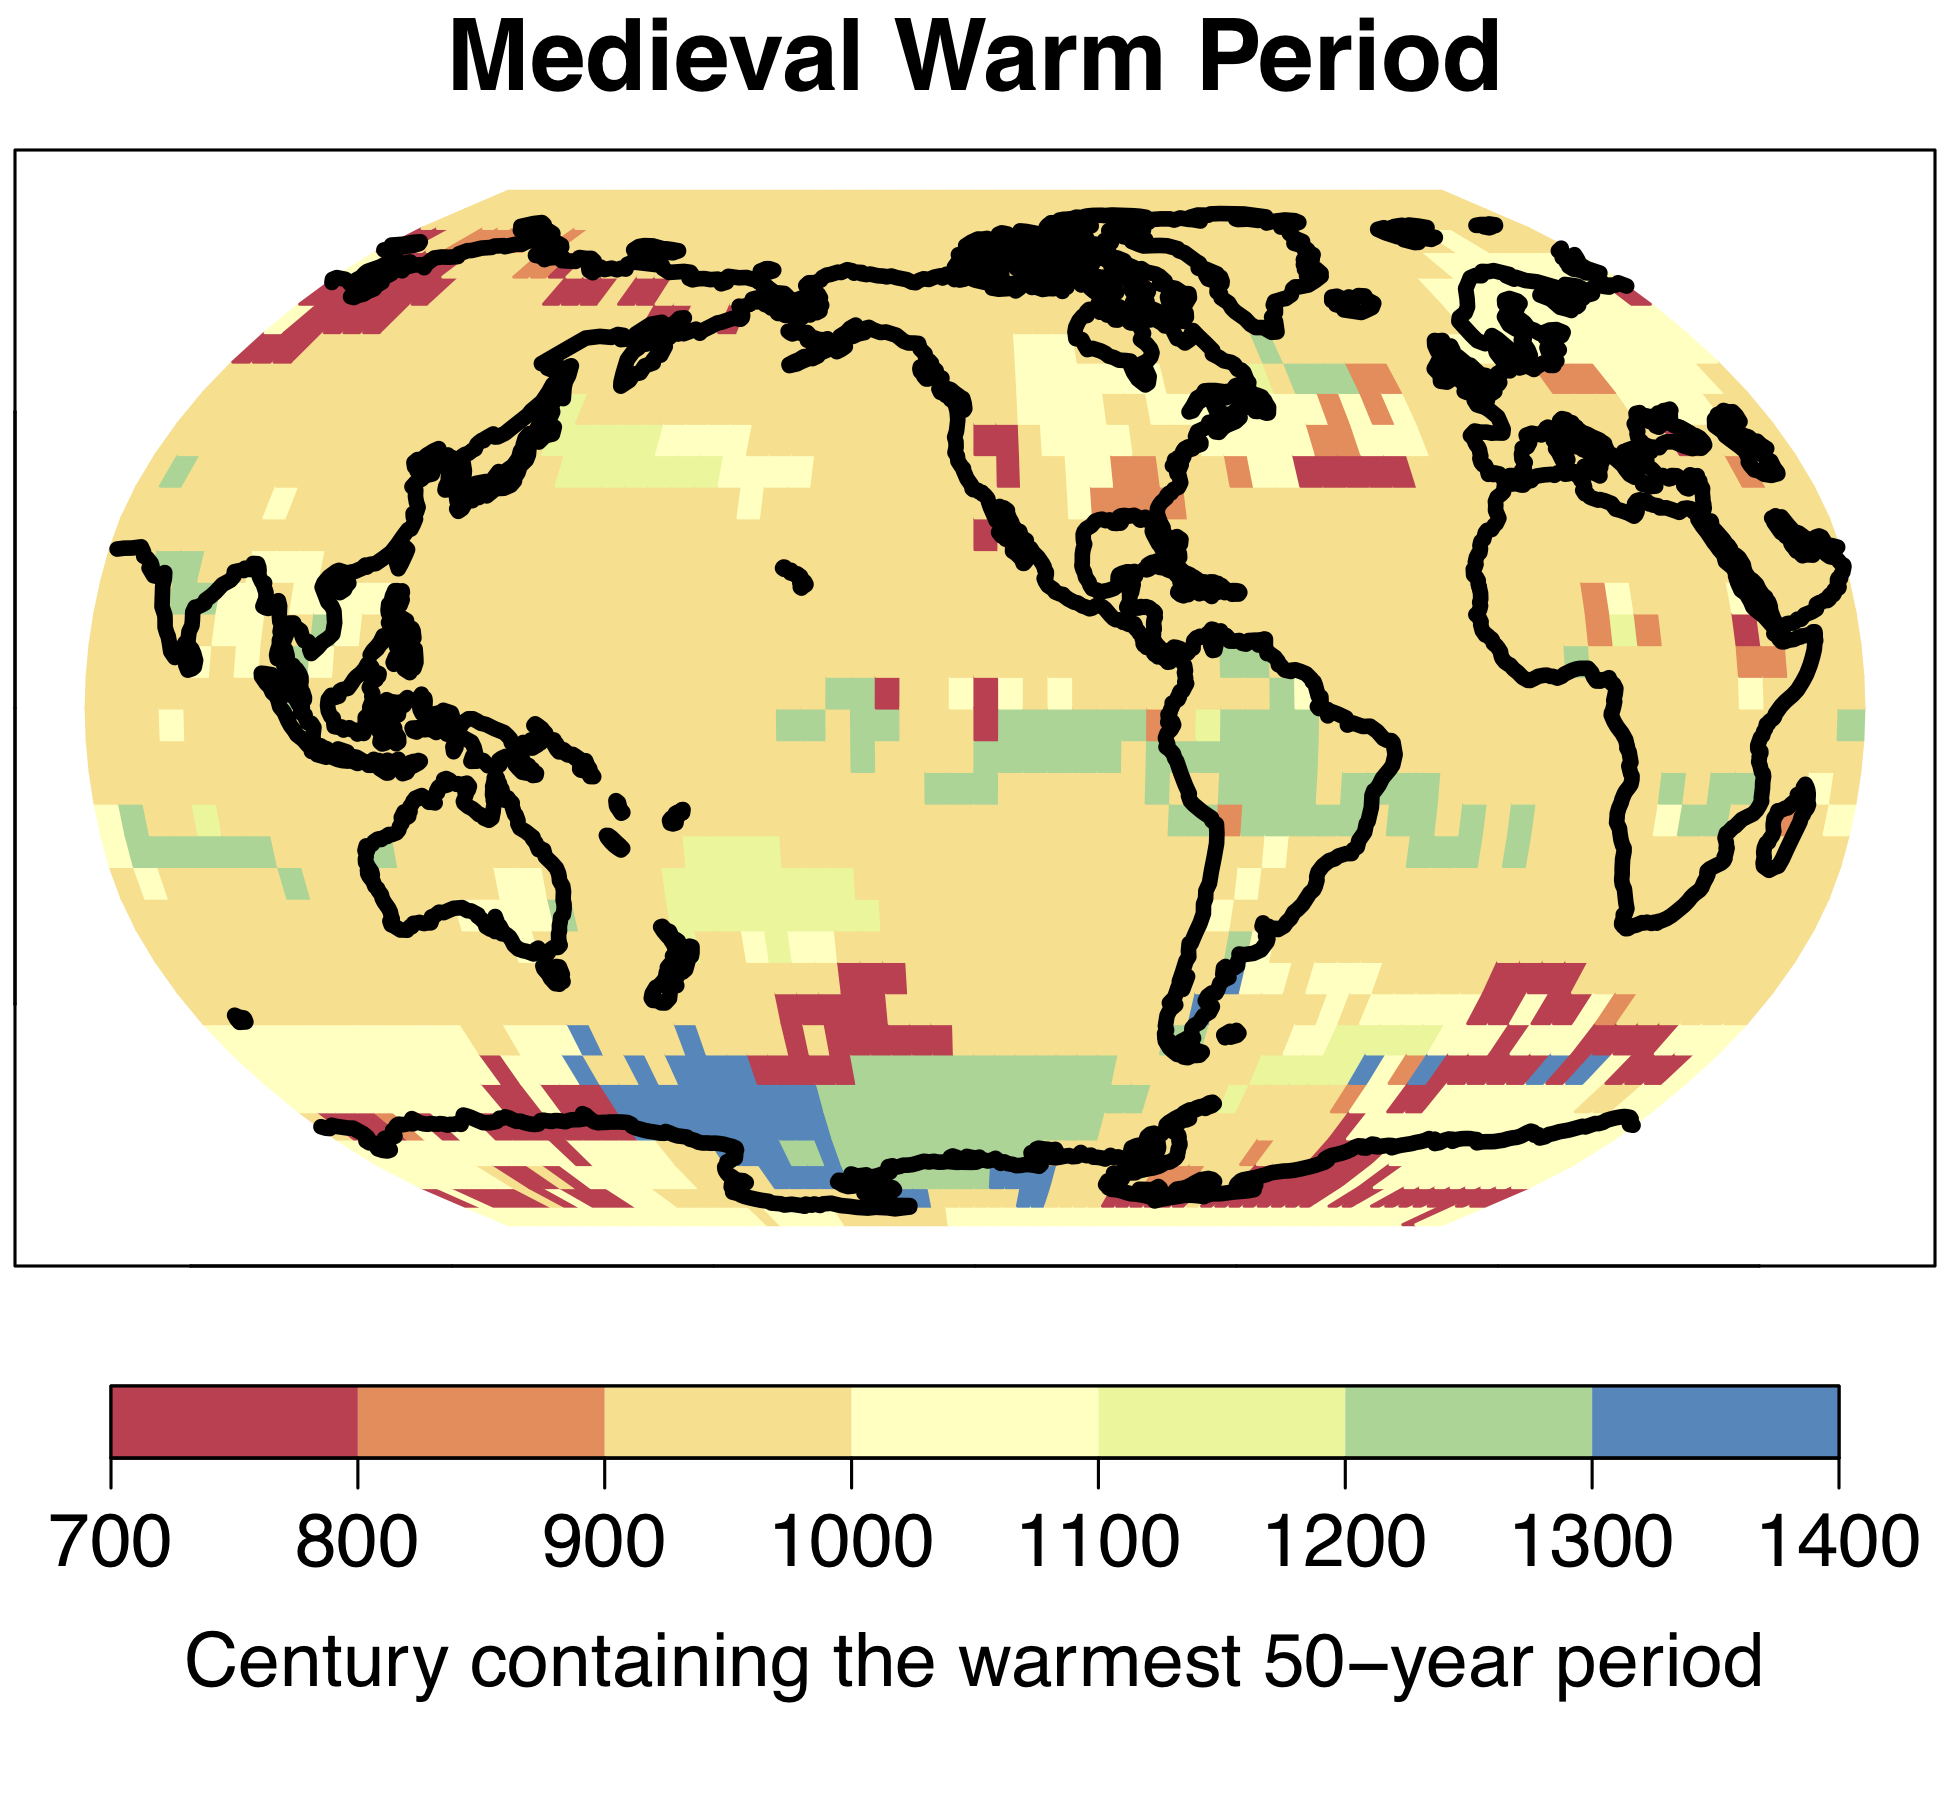 The warm period which became known as the "Medieval Warm Period" in Europe and North America was not a global phenomenon; the warmest 50-year period between the years 700 and 1400 occurred at different times in different regions. © University of Bern